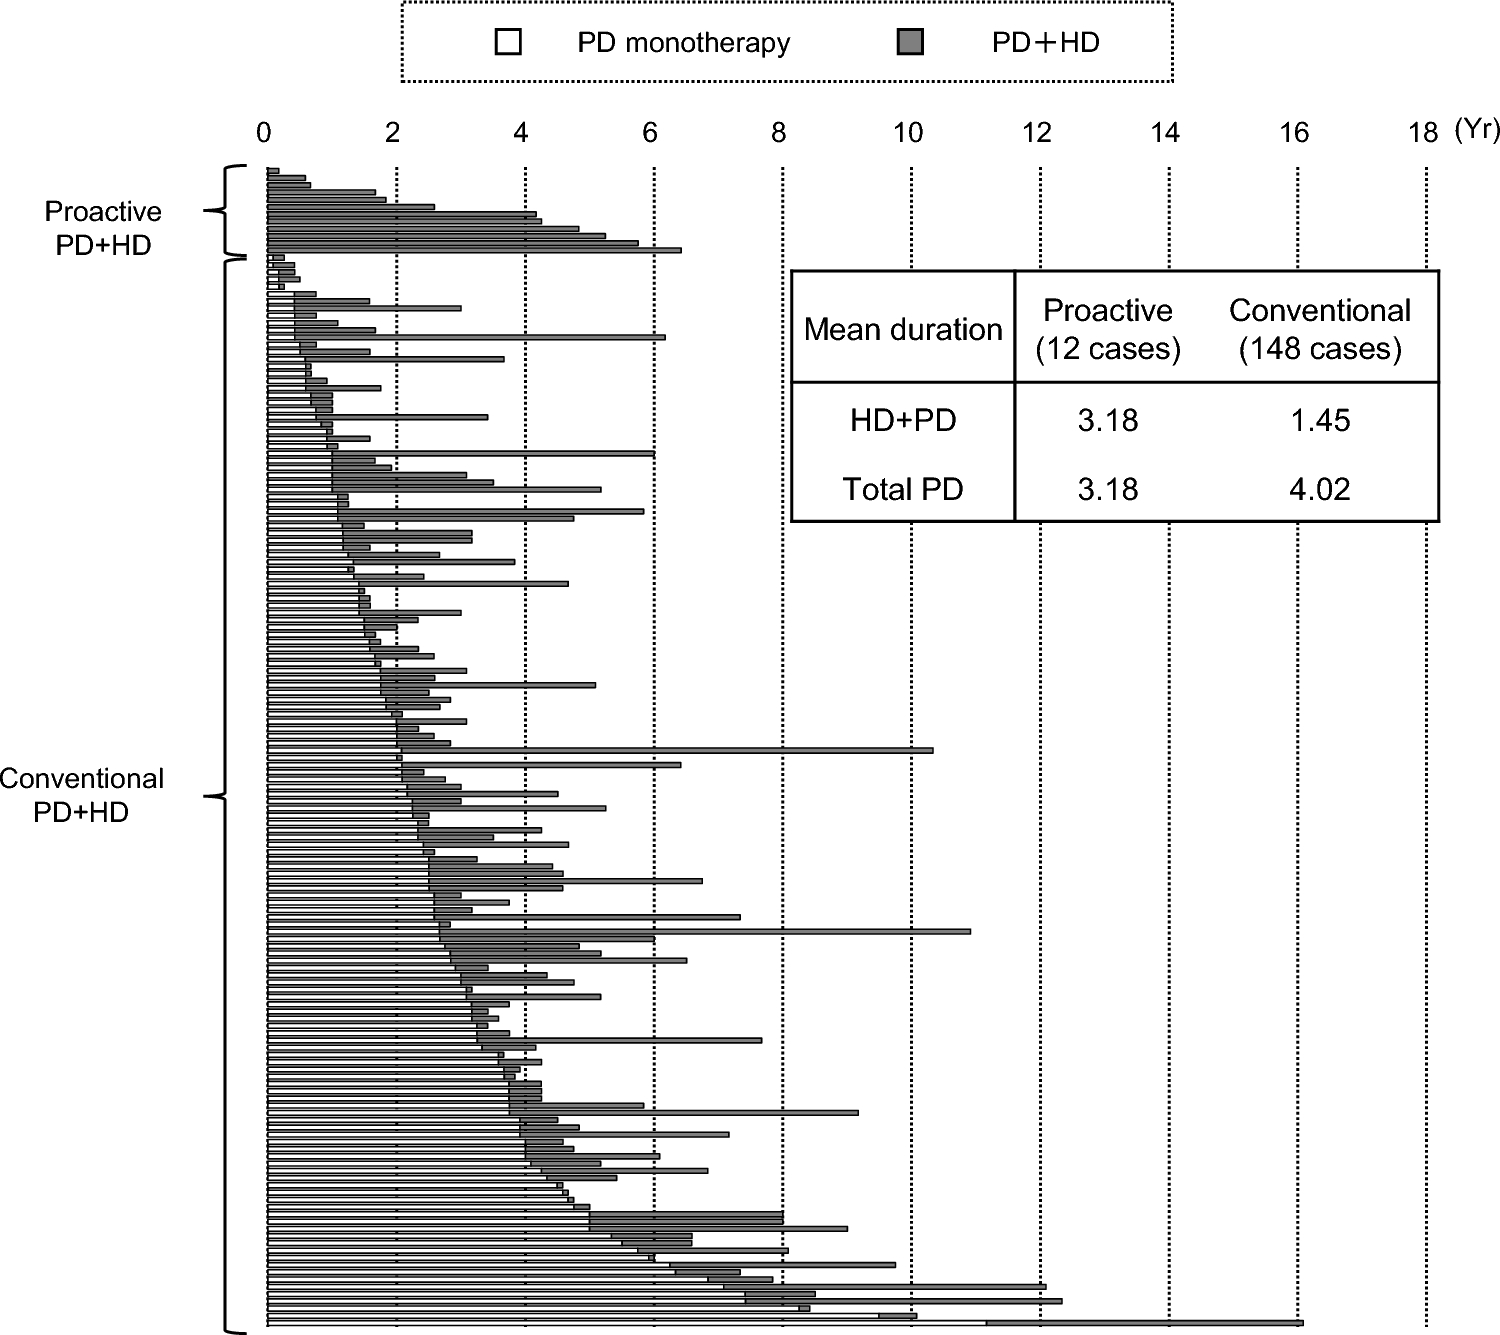 Effect of proactive combination therapy with peritoneal dialysis and hemodialysis on technique survival and mortality